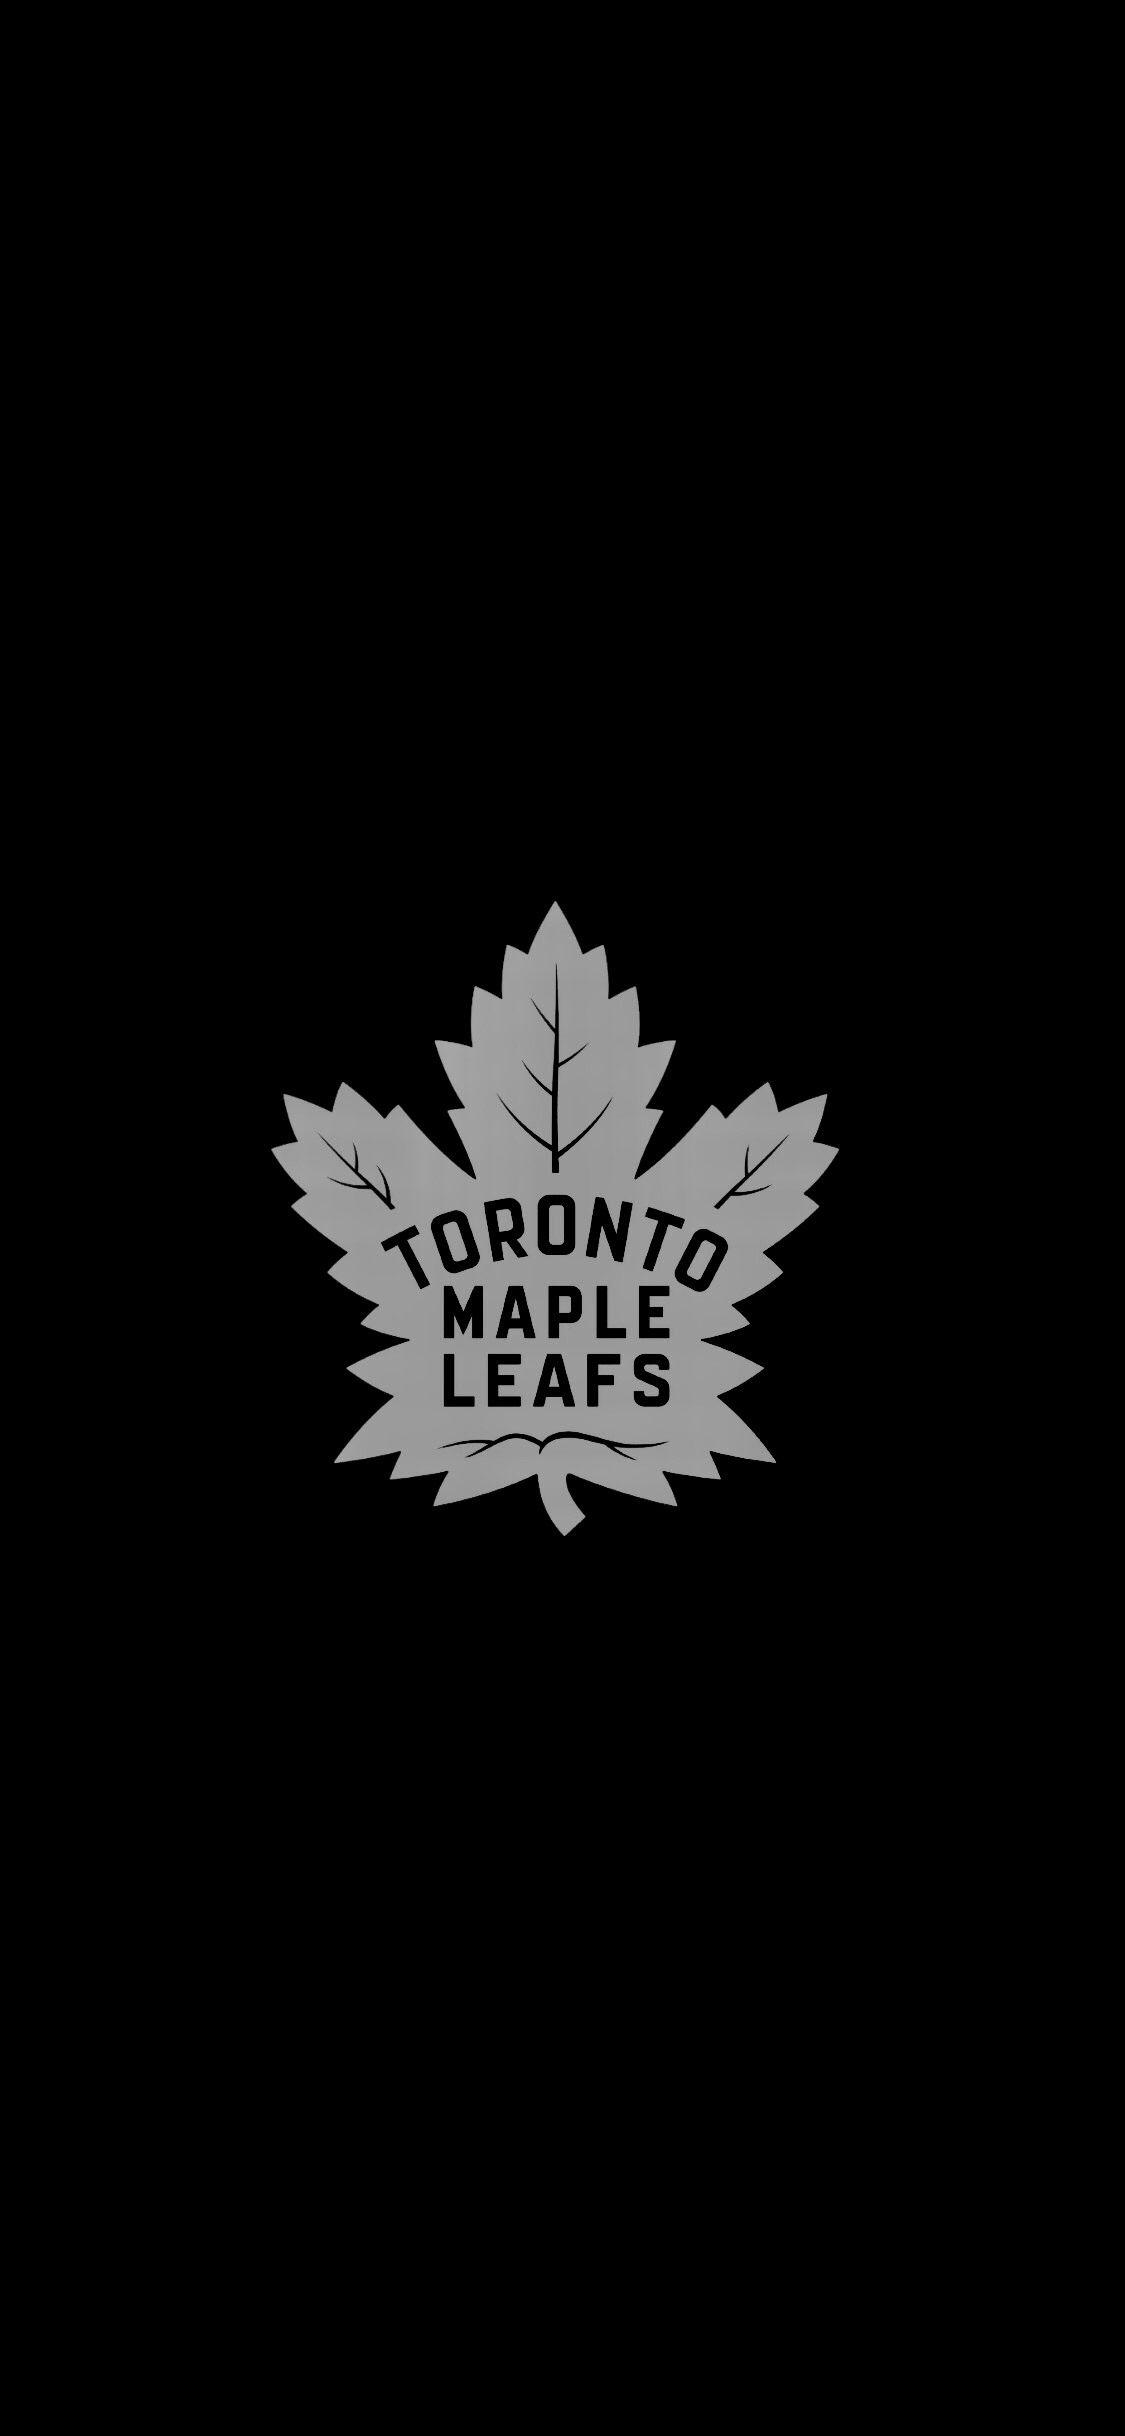 toronto maple leafs wallpaper for iphone - Google Search  Toronto maple  leafs wallpaper, Maple leafs wallpaper, Toronto maple leafs logo